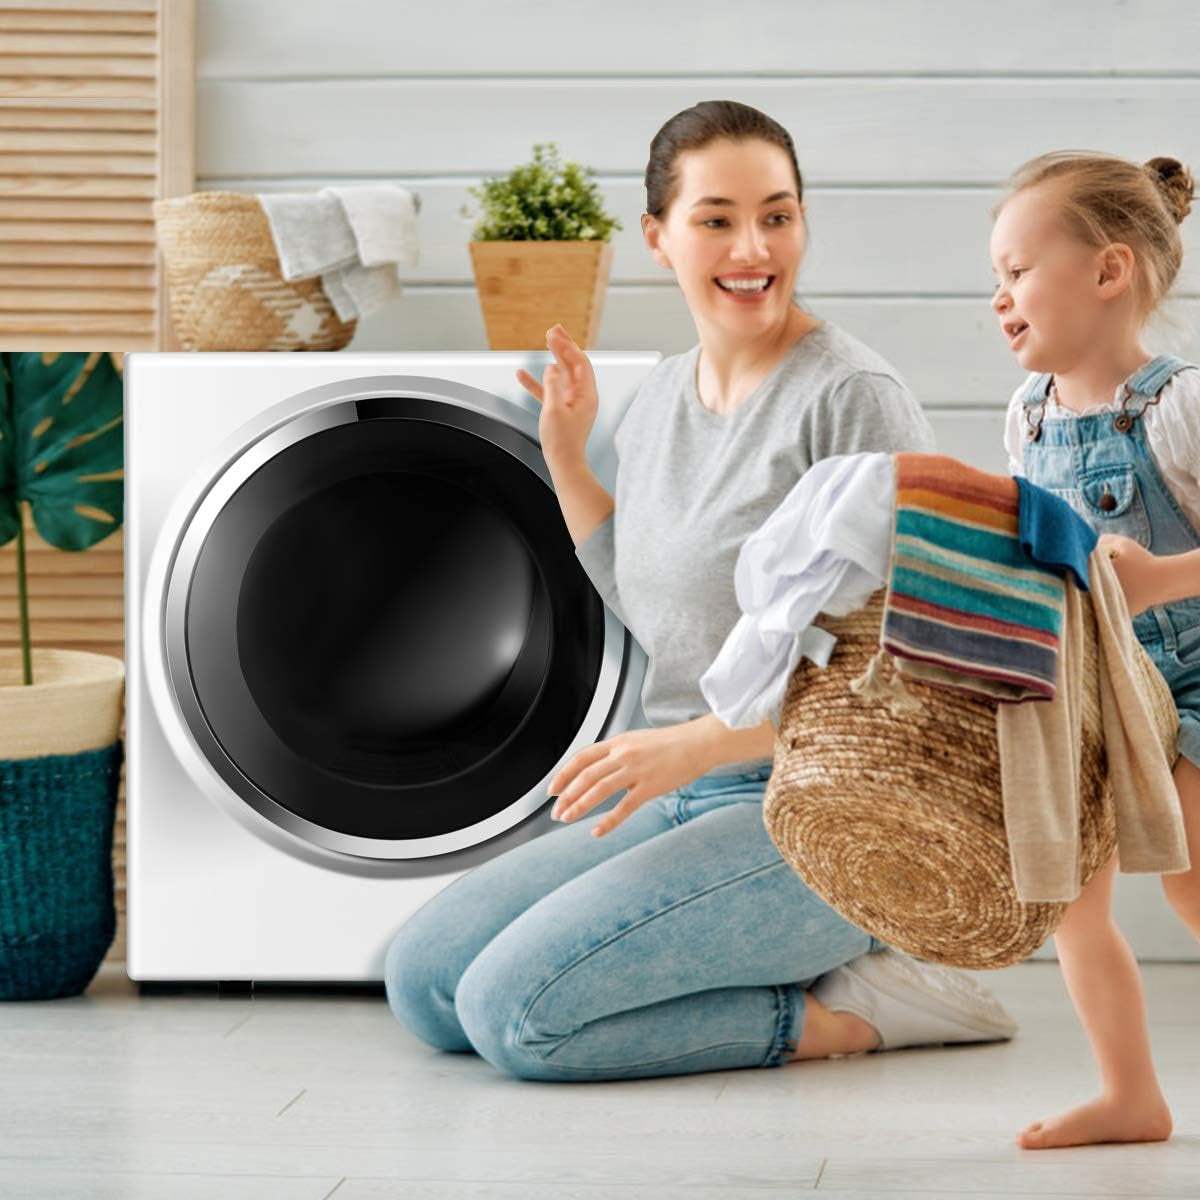 110V Electric Portable Clothes Dryer with Stainless Steel Tub